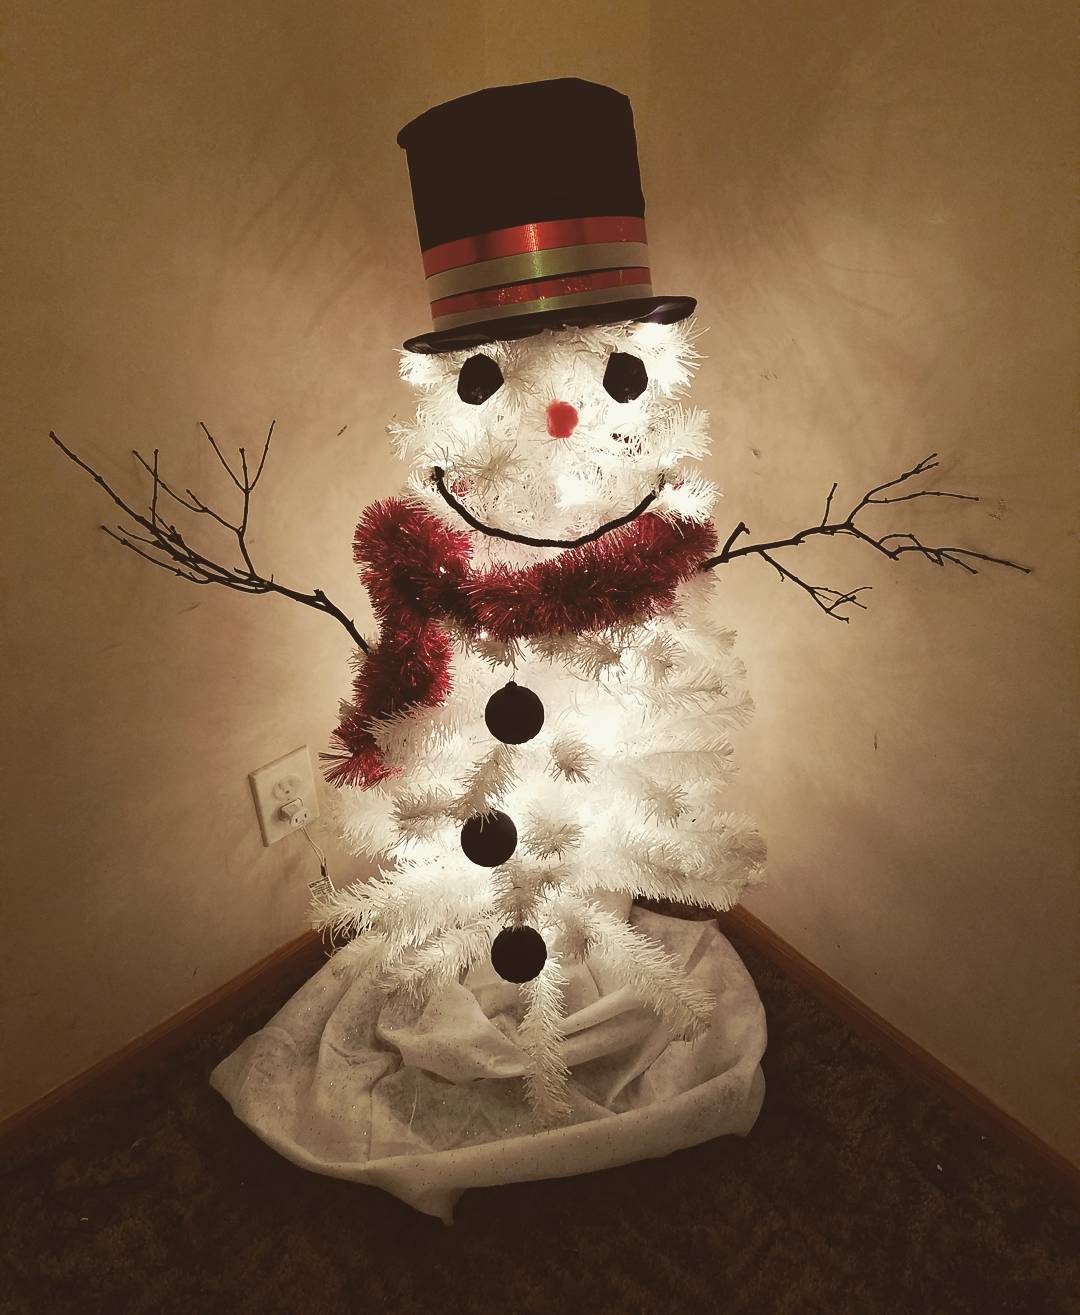 Snowman Christmas tree is finally here!